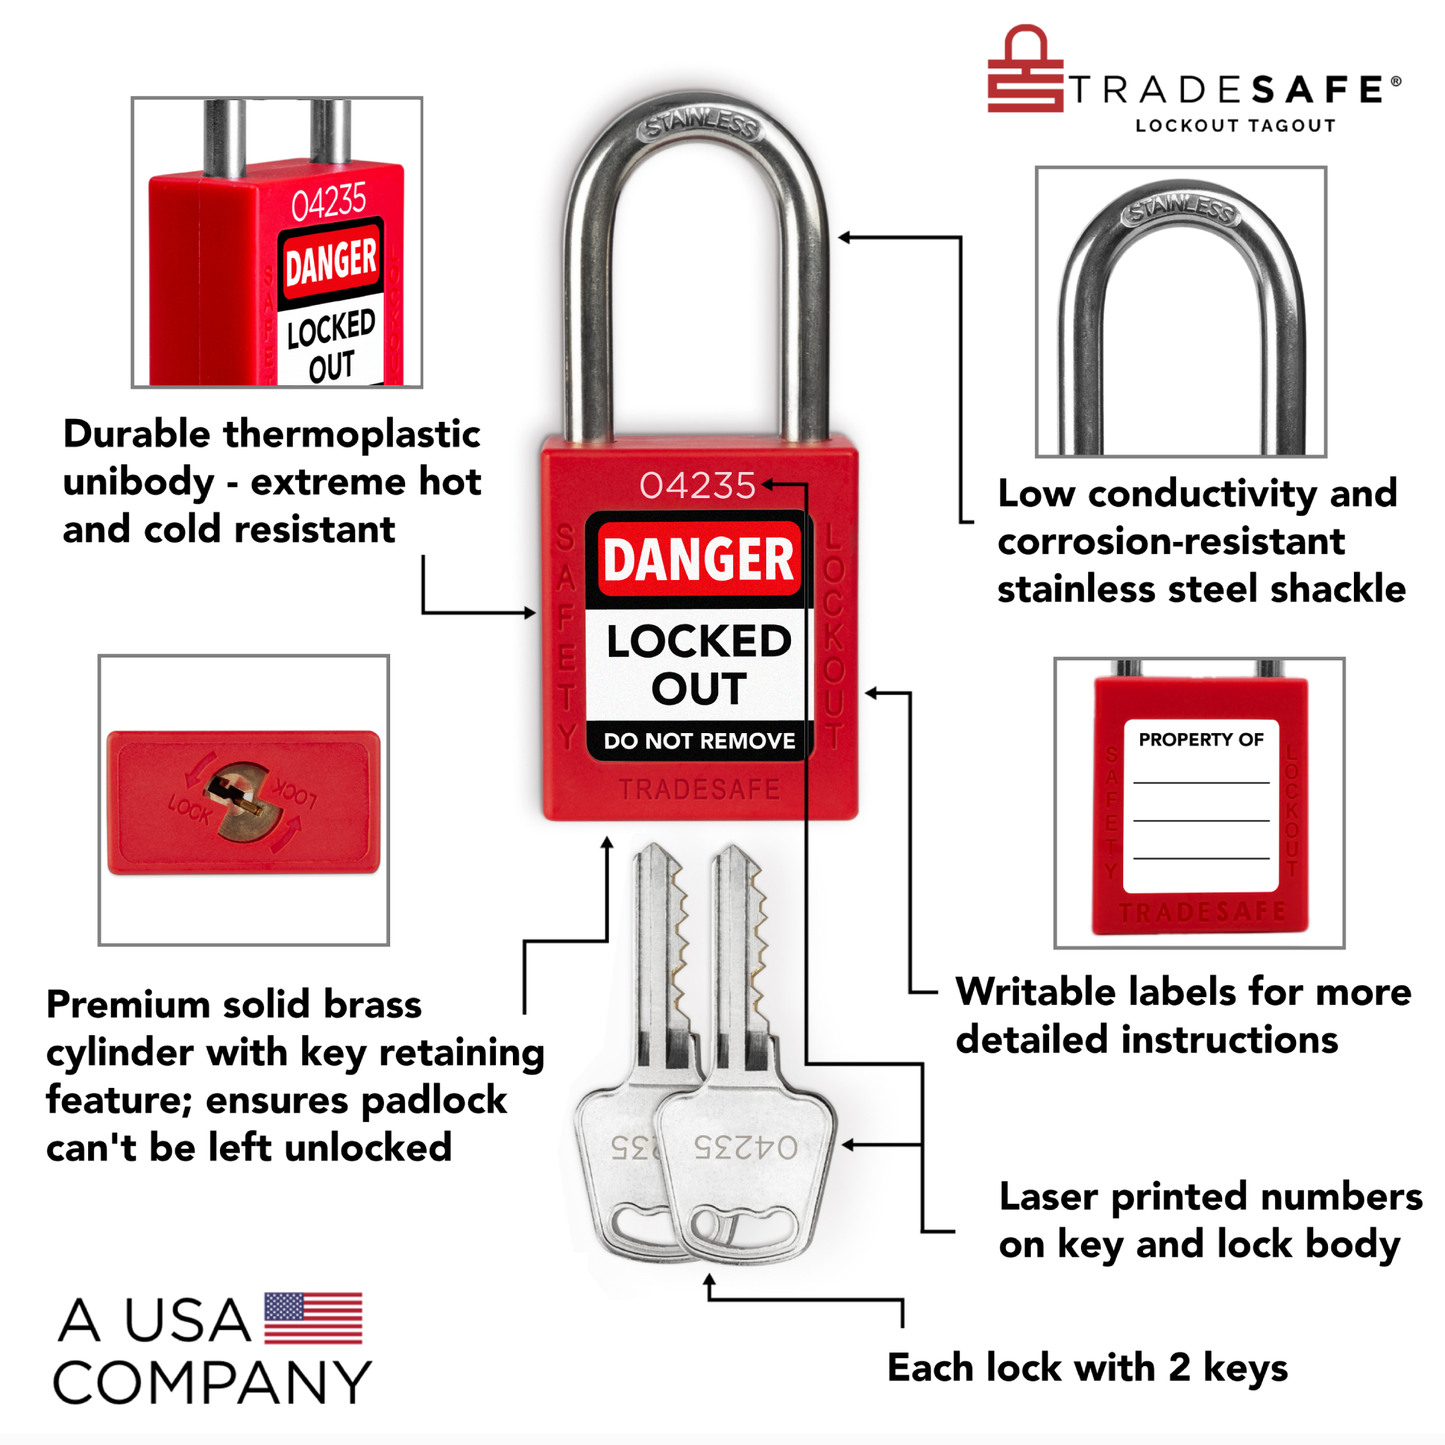 infographic of a red loto lock with 2 keys indicating materials used in each part